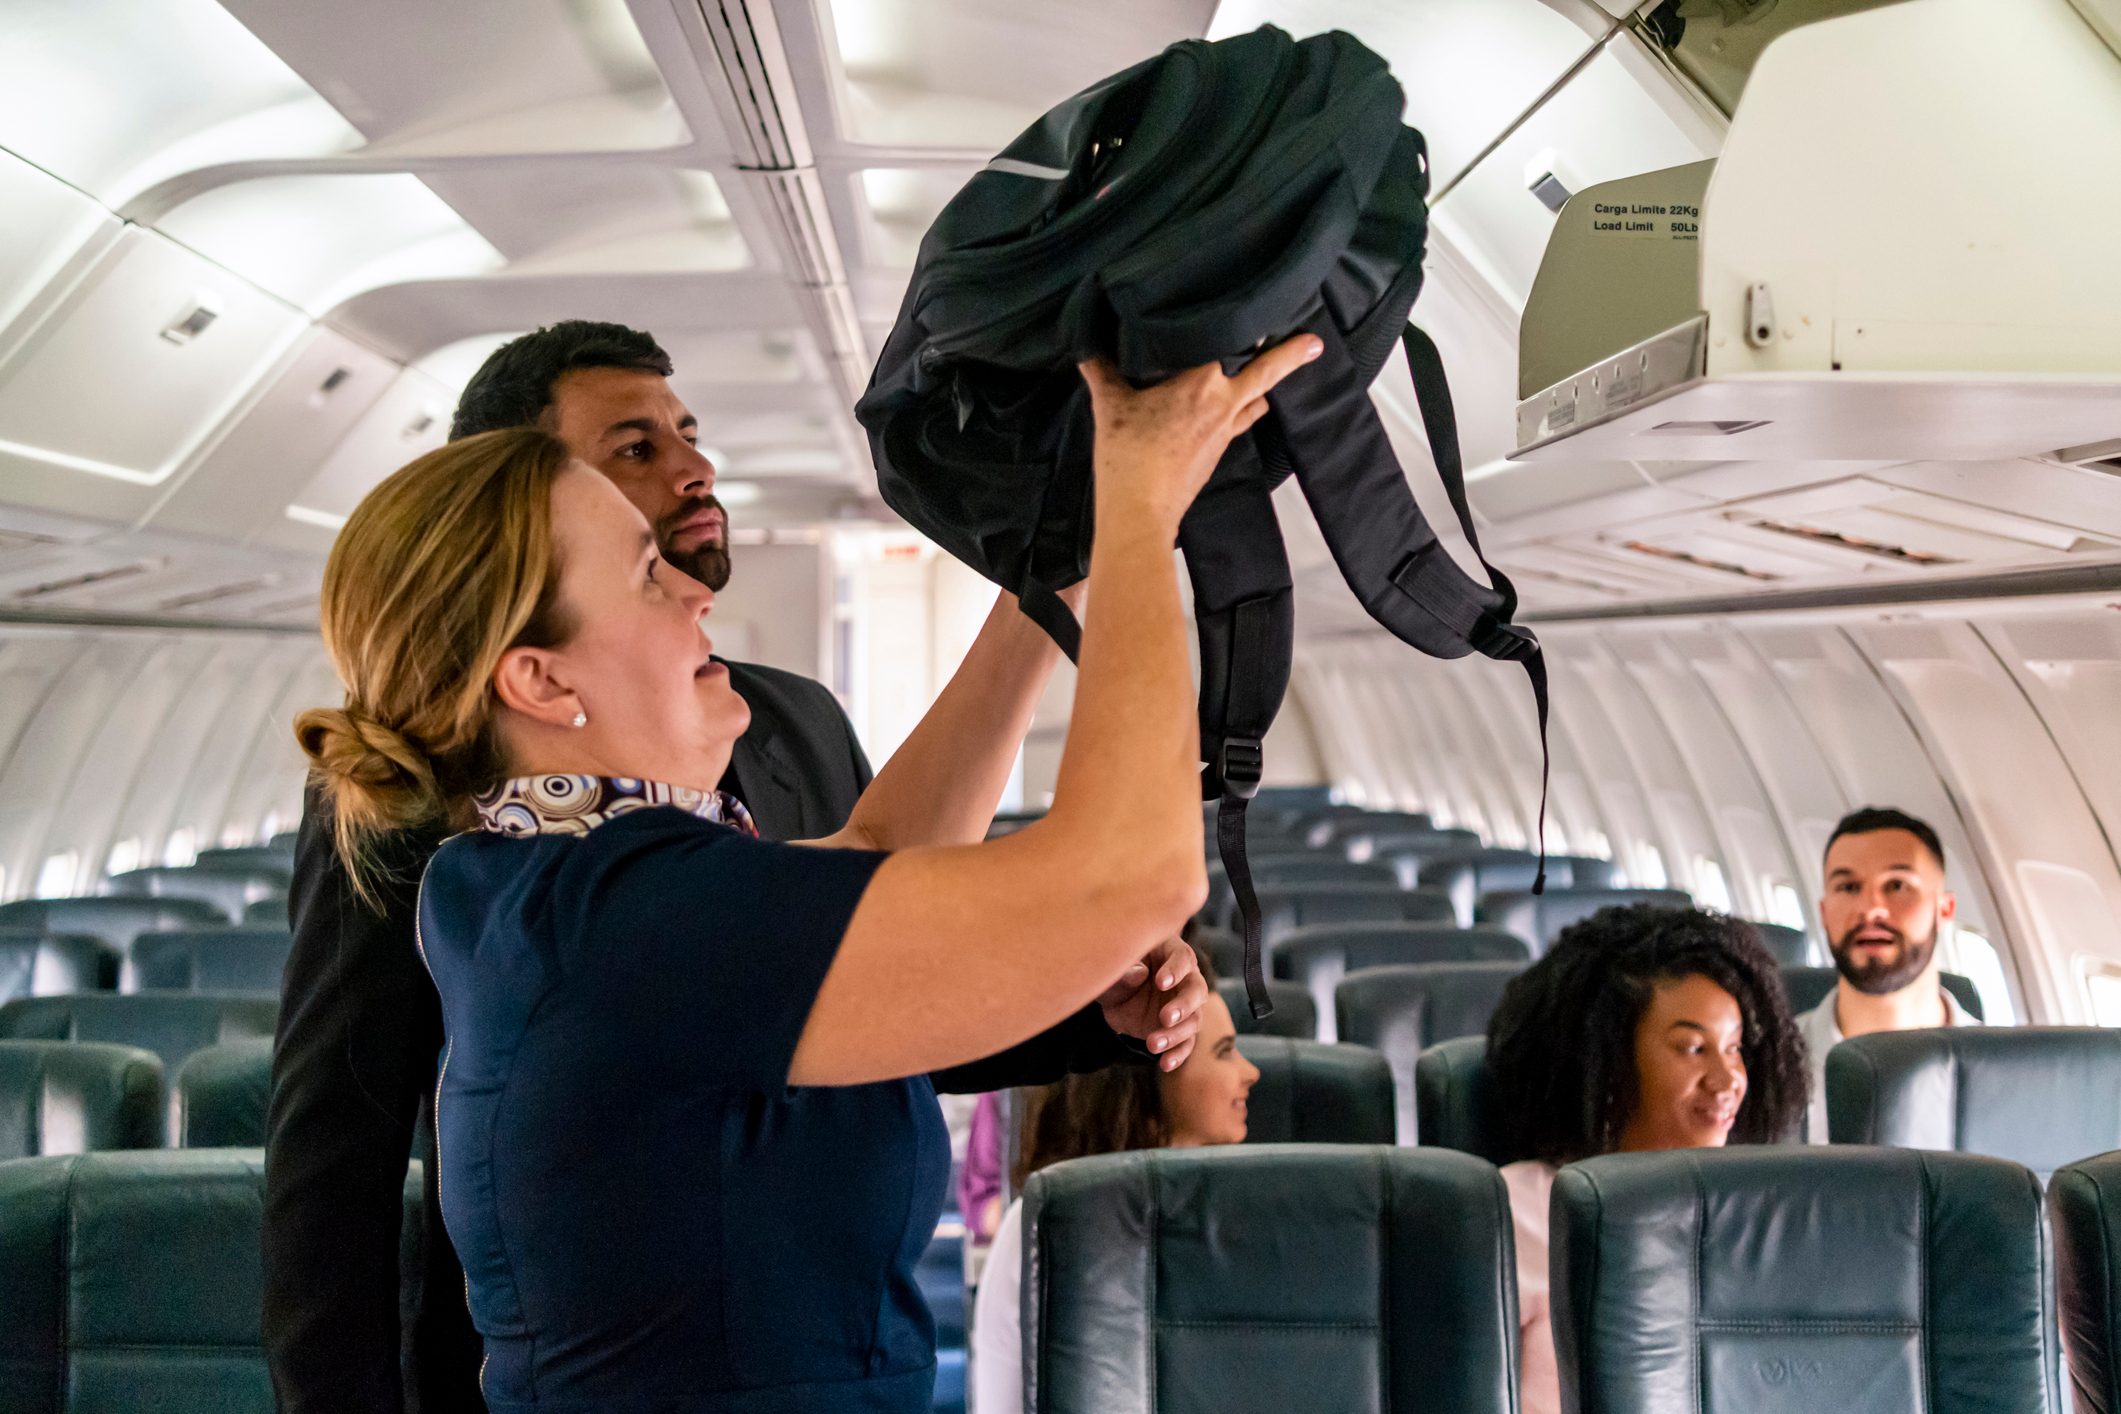 6 Of The Most Surprising Things Flight Attendants Secretly Look For When  You Board A Flight